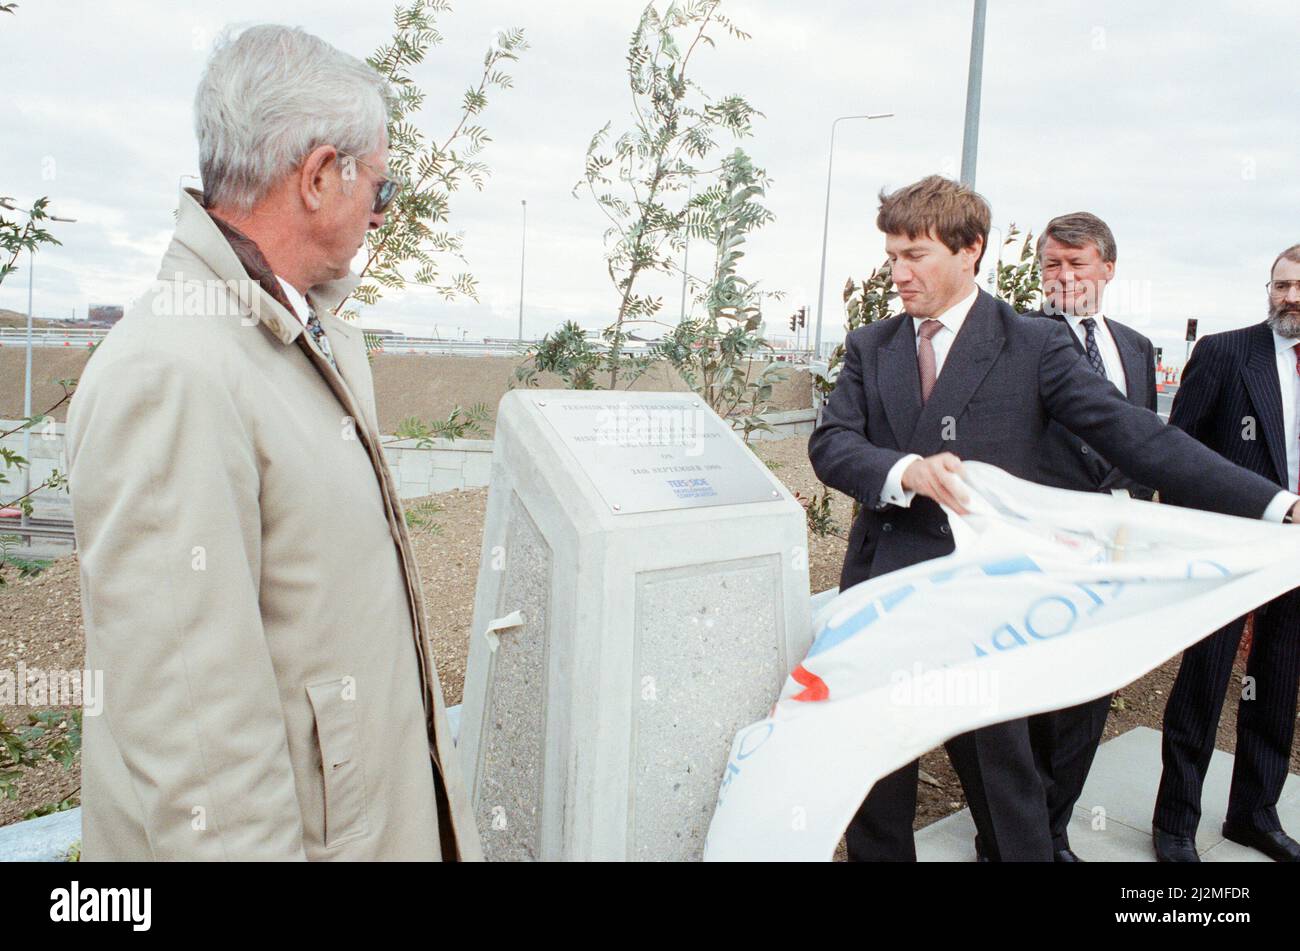 Local Government and Inner Cities Minister Michael Portillo unveils a plaque to mark the opening of the Teesside Park Interchange, with him is Ron Norman, chairman of the TDC. 24th September 1990. The cicil engineering job completed by construction firm Birse, of Middlesbrough, was completed at the Teesside Park retail and leisure complex site. It involved eight miles of piling into peat land at the former racecourse site so an interchange and 500,000 square ft shopping centre could be built. Stock Photo